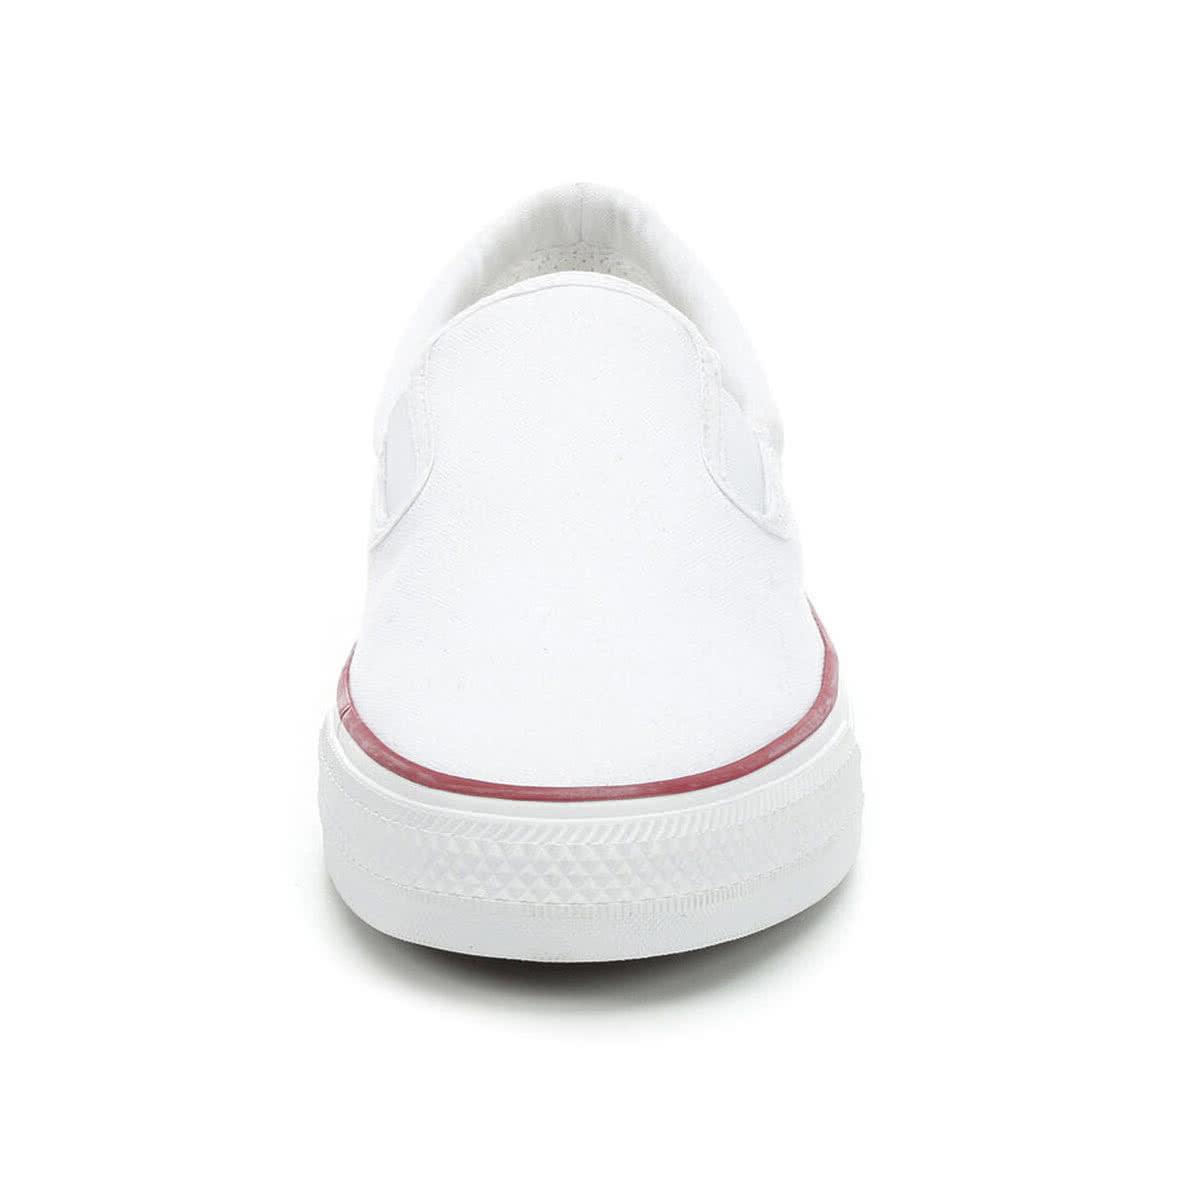 Buy Converse Chuck Taylor All Star Canvas High Top,Optical White, 9 Women/7  Men at Amazon.in